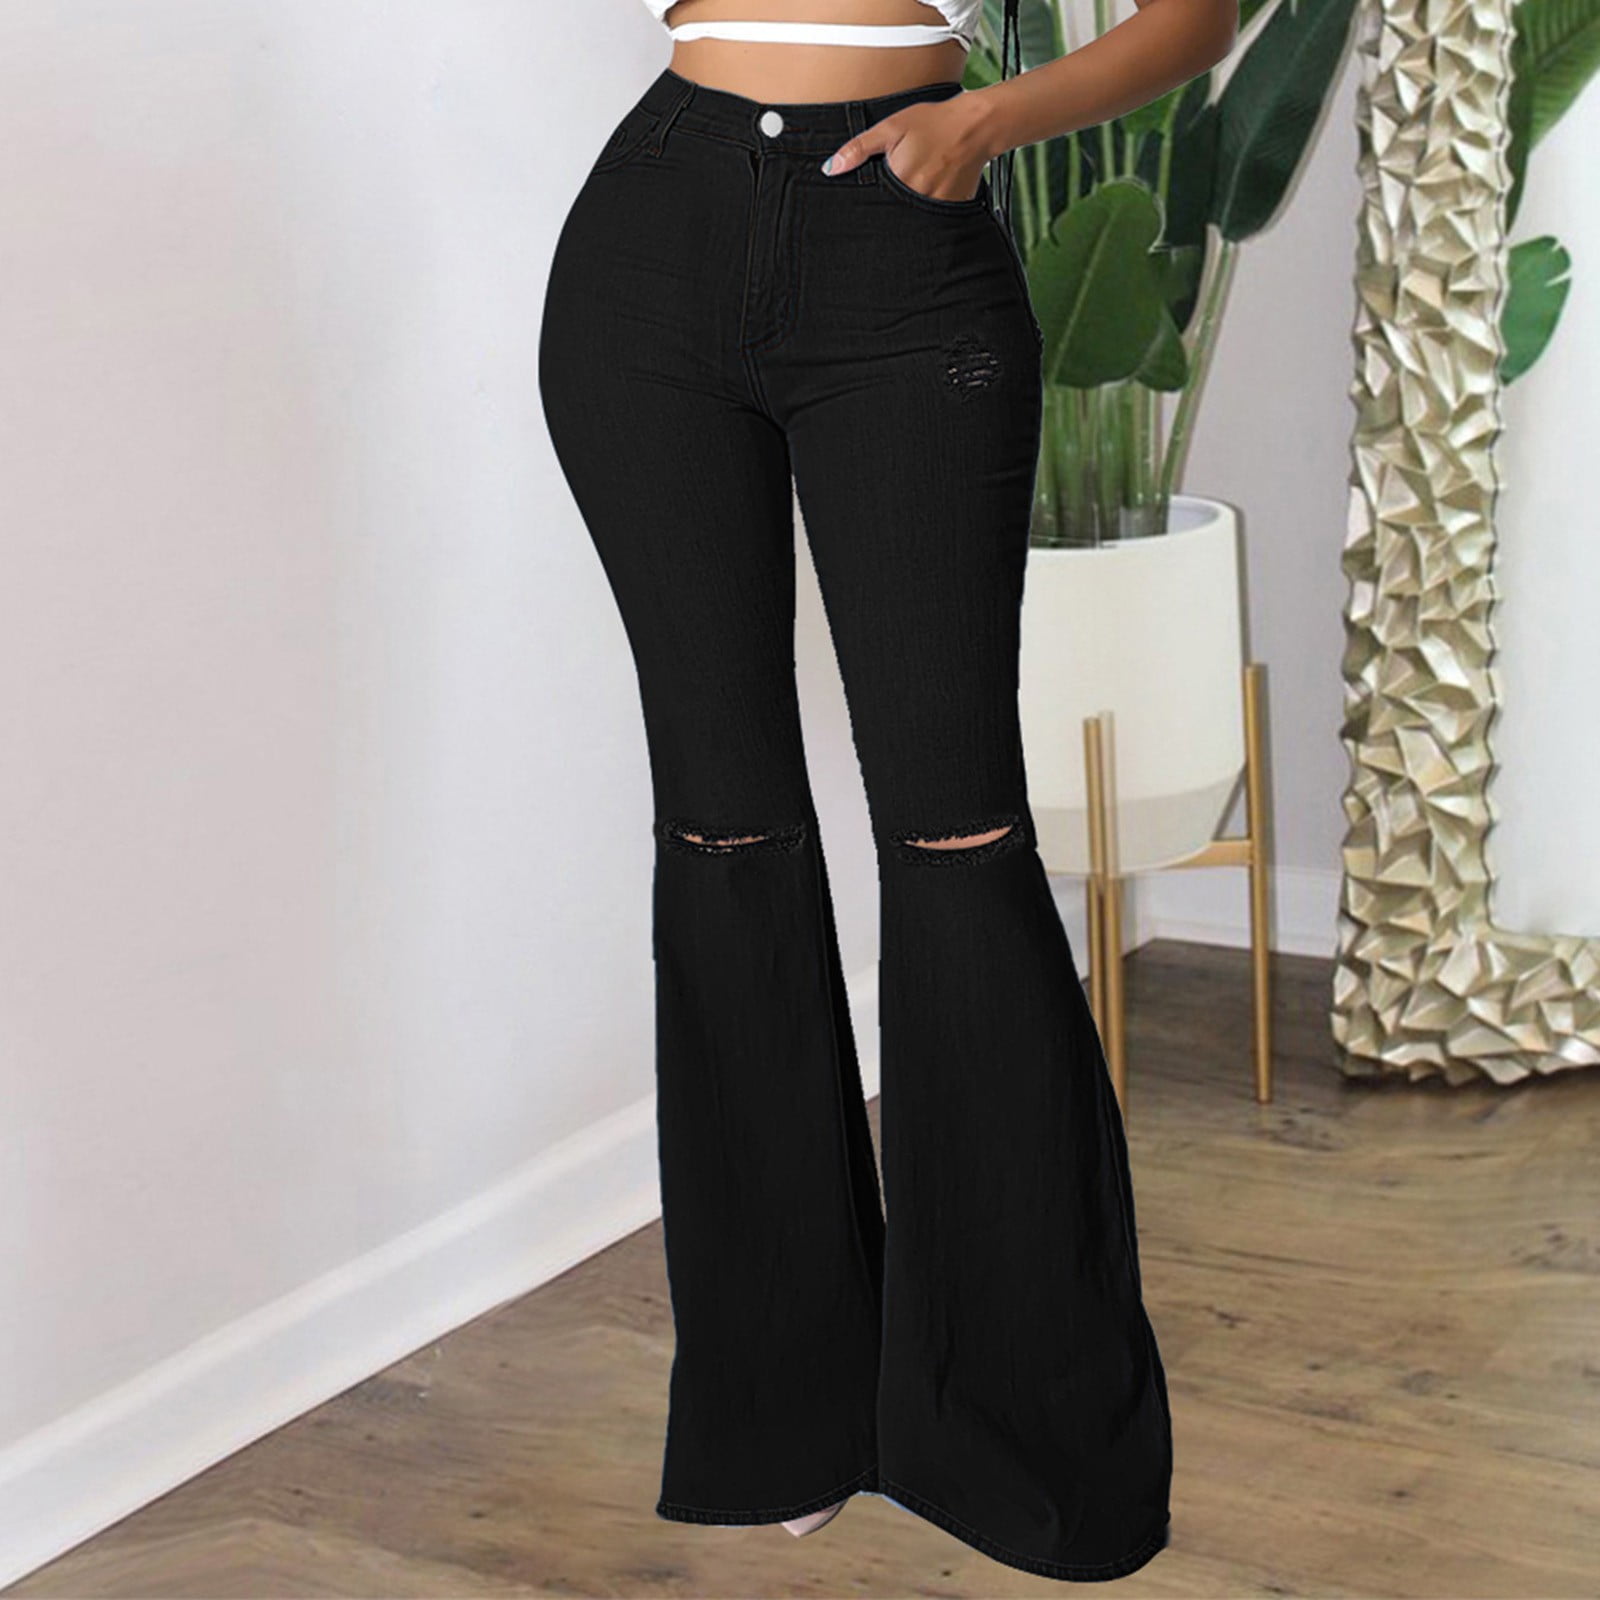 How to Style Wide Leg Jeans - THE FASHION HOUSE MOM